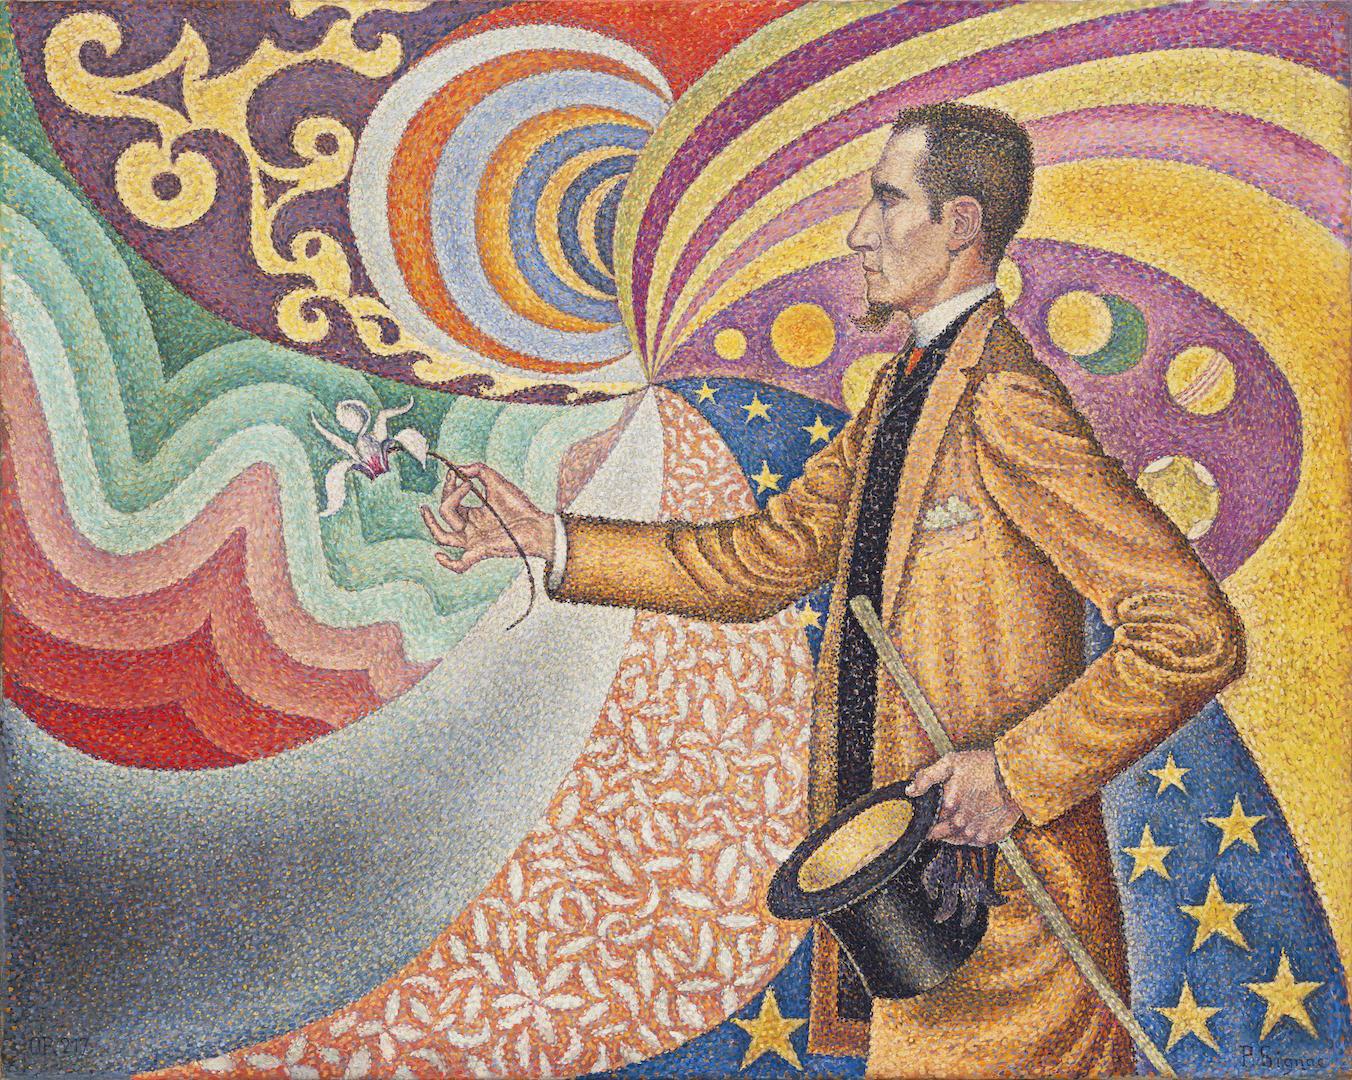 Paul Signac - Opus 217 Against the Enamel of a Background Rhythmic with Beats and Angles, Tones, and Tints, Portrait of M Félix Fénéon in 1890